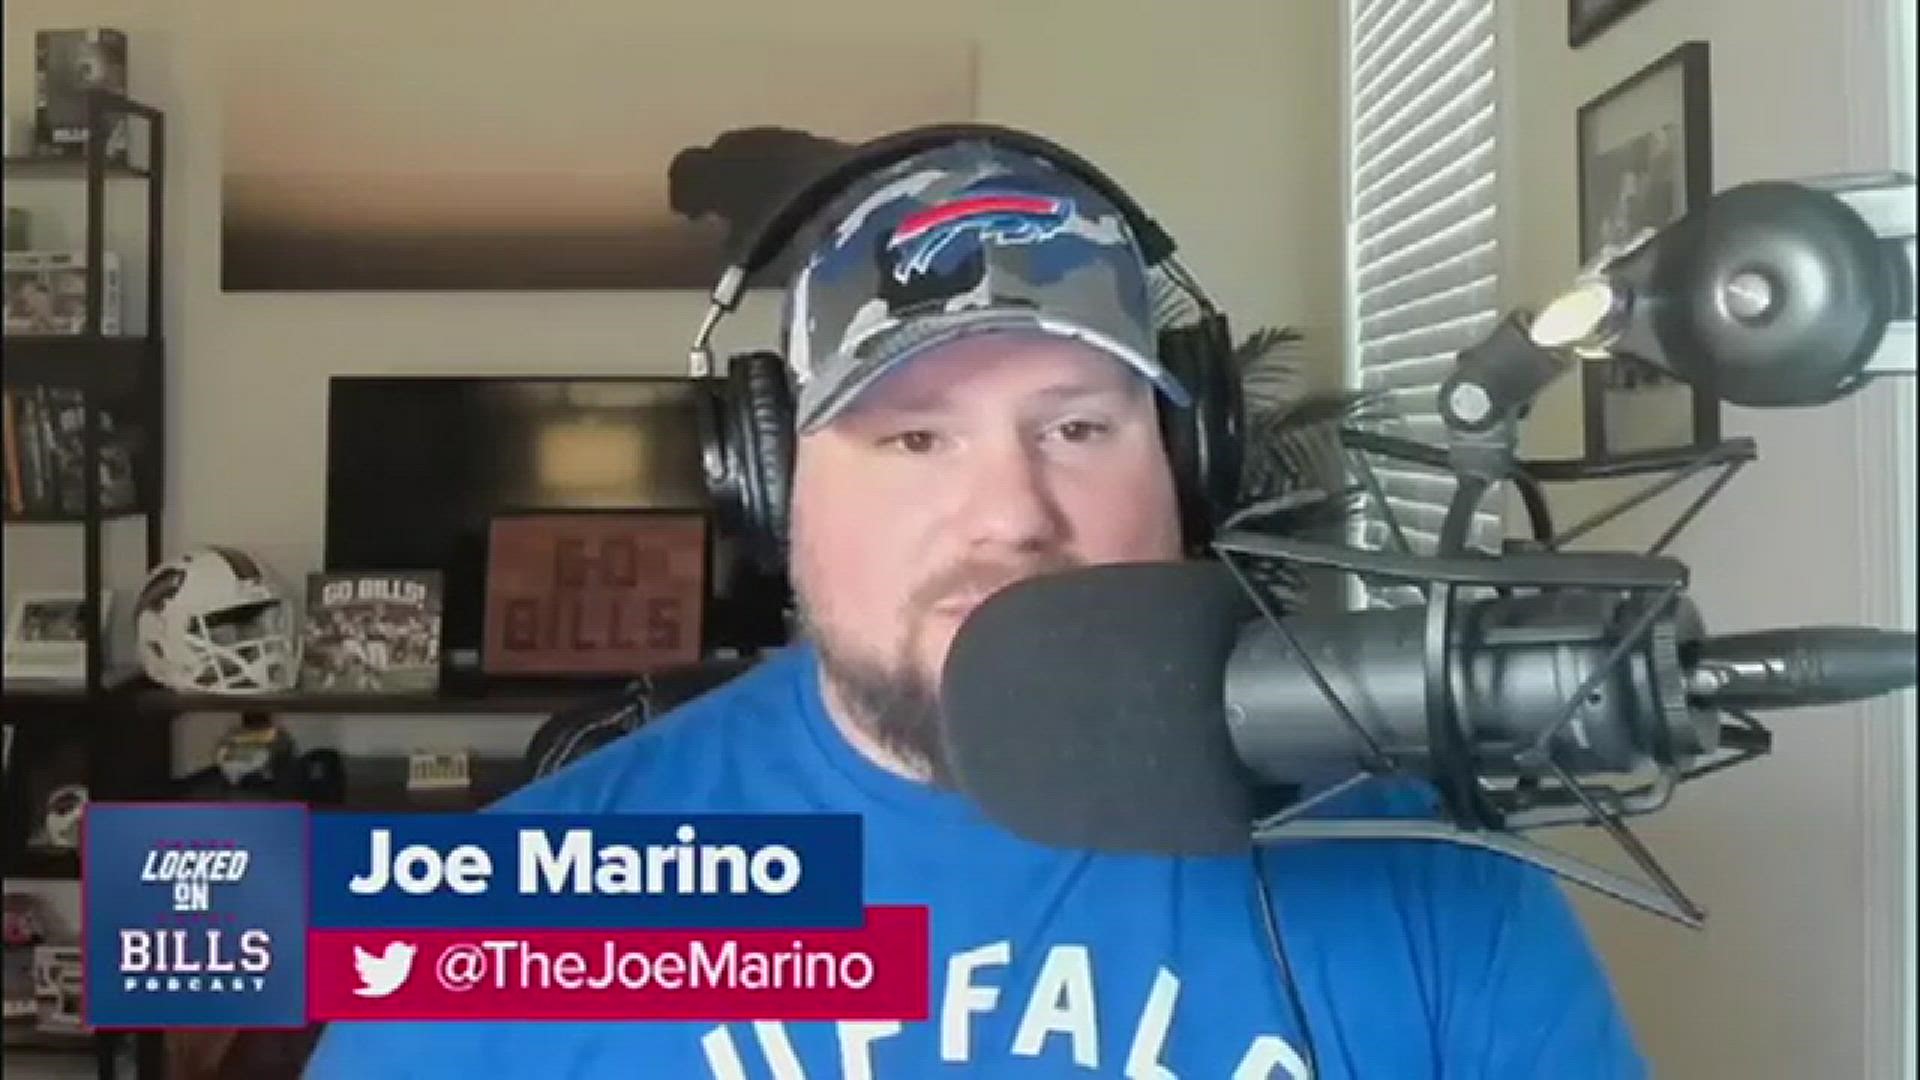 On today's podcast, Joe Marino offers his final thoughts, discusses the injury situation with Dr. Kyle Trimble of Banged Up Bills and gives his 5 game predictions.